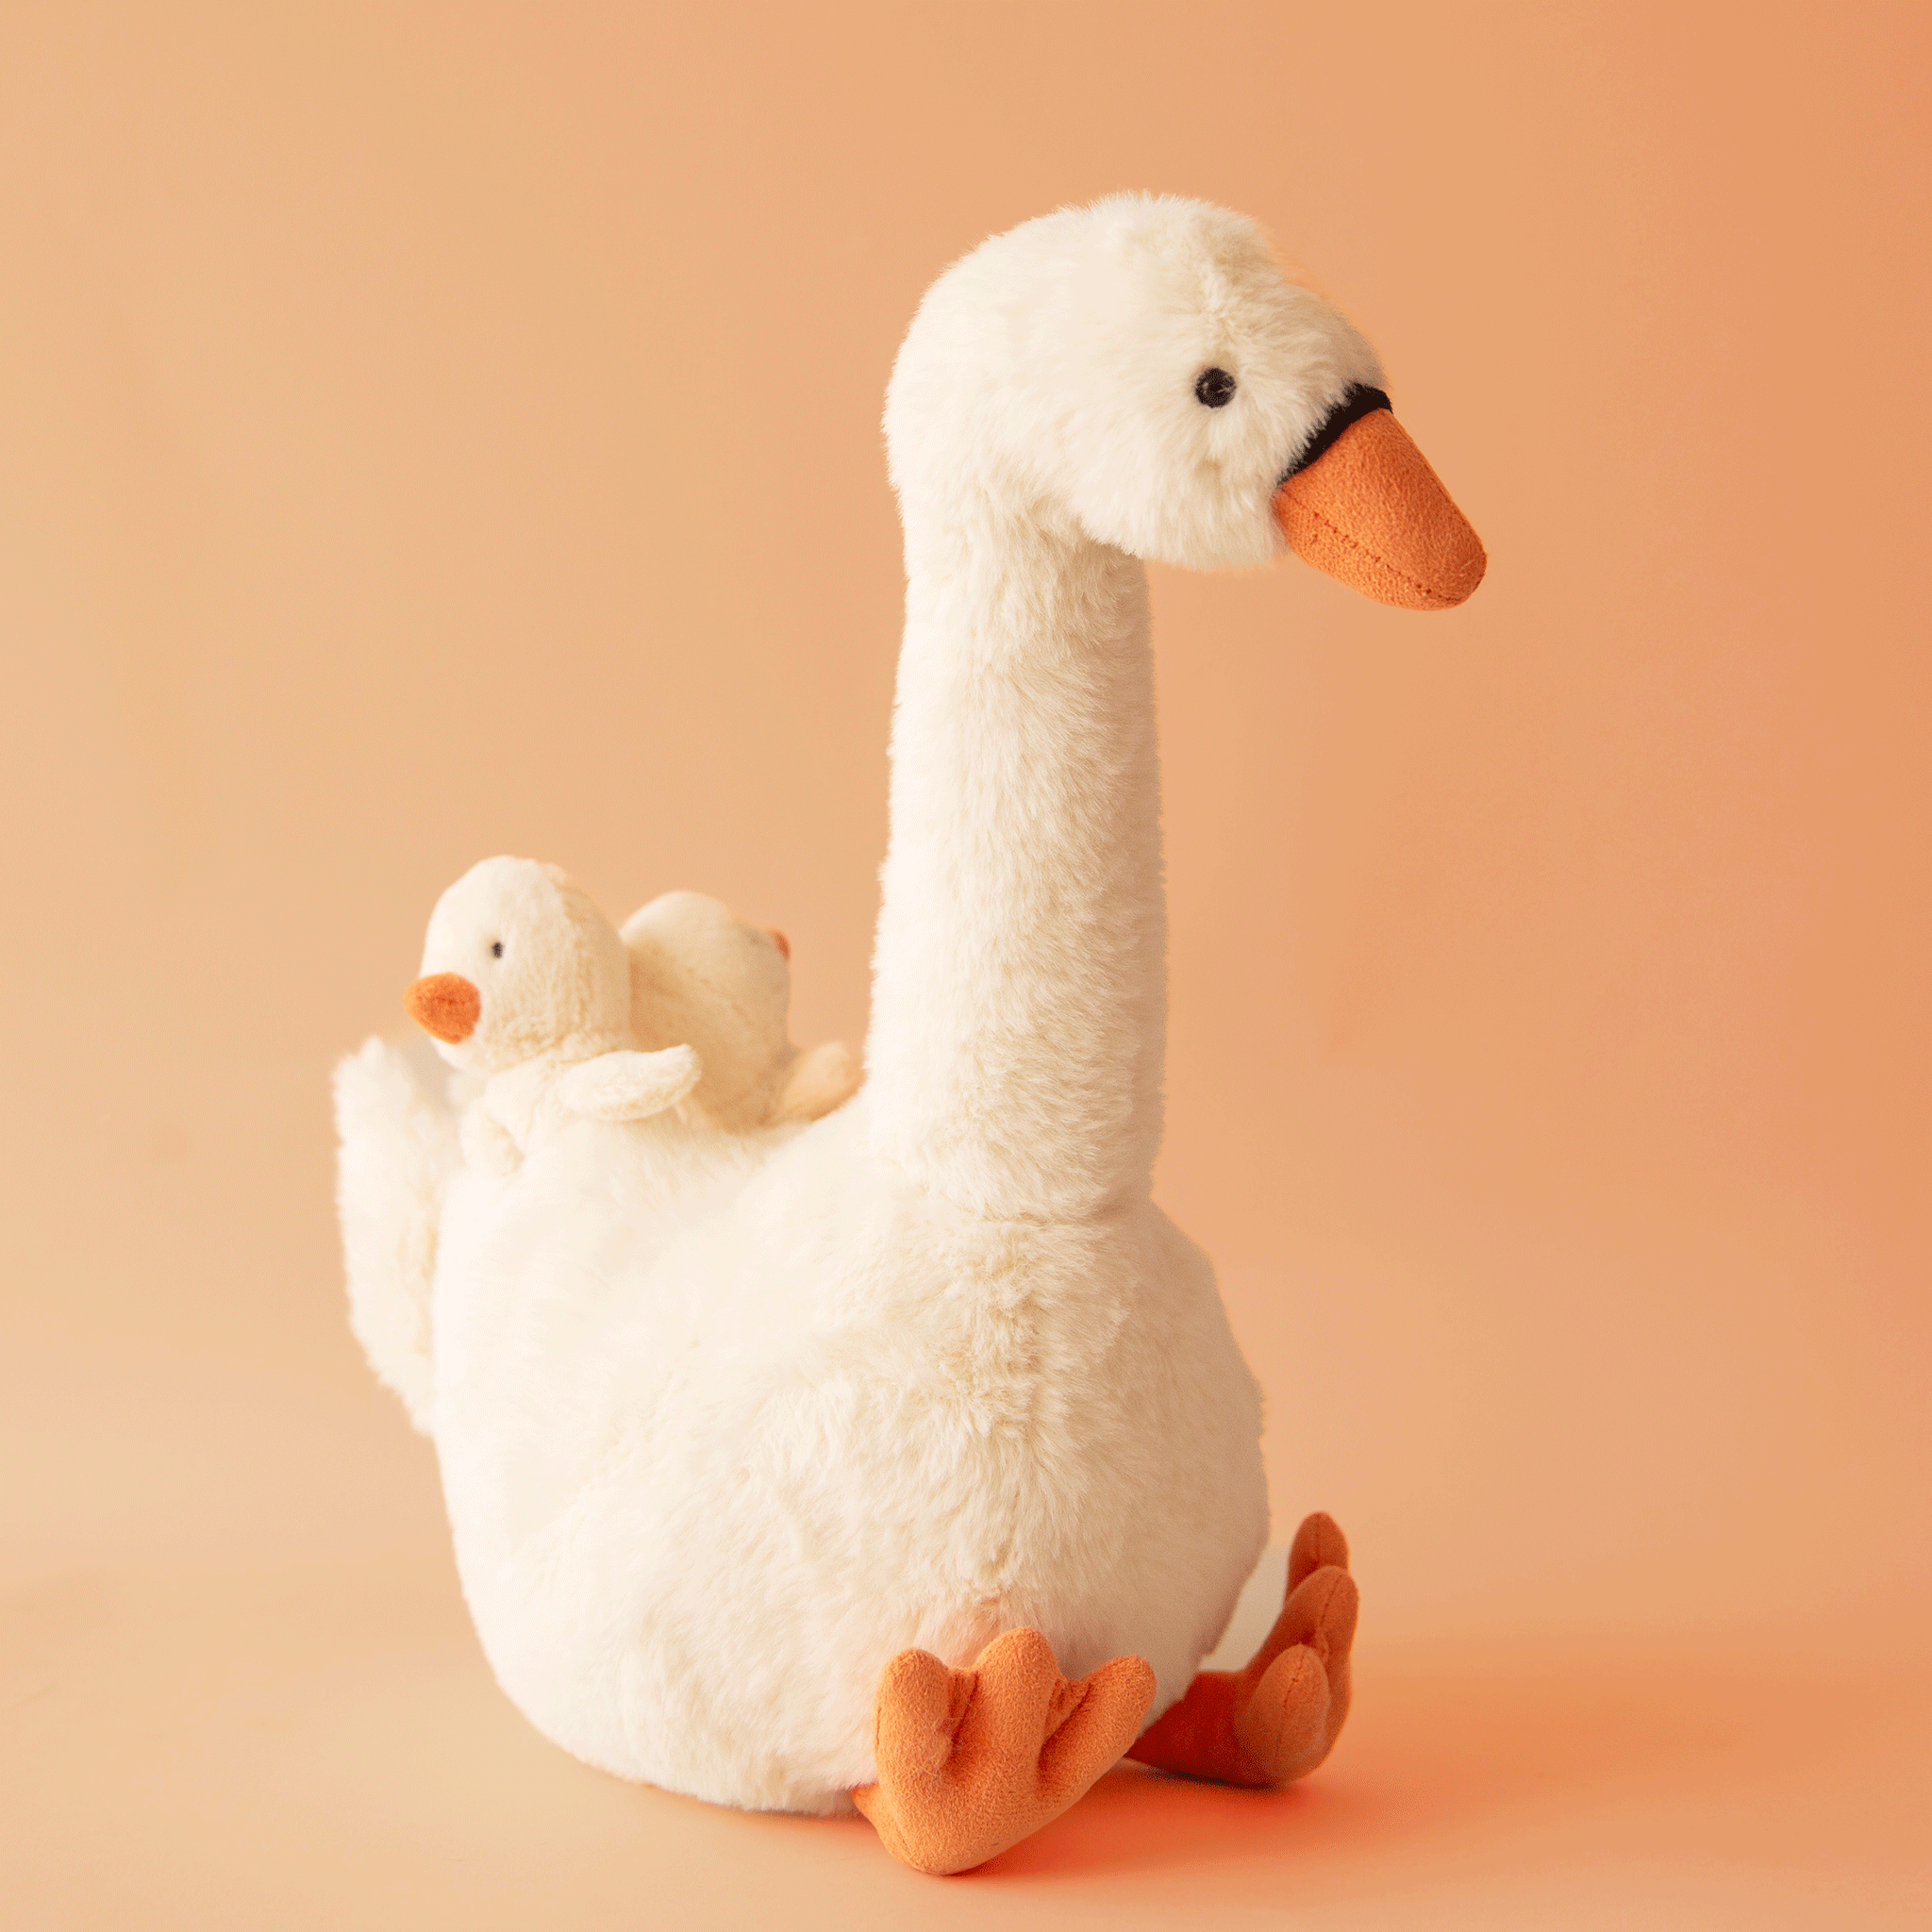 On a orange background is a swan shaped stuffed animal toy with two baby swans on her back.